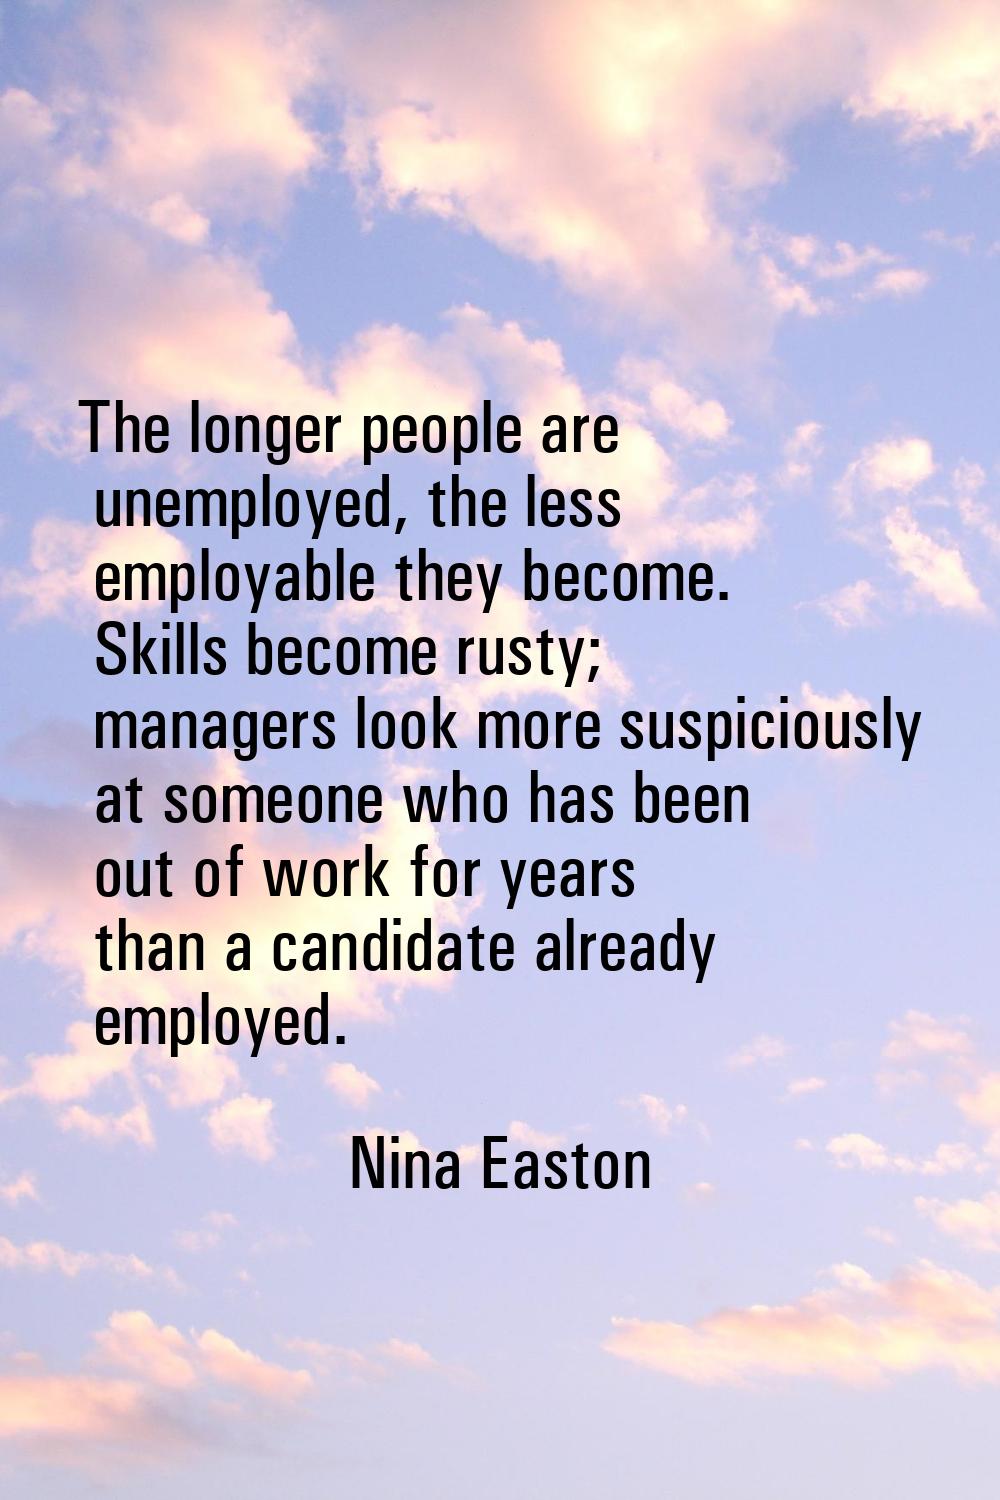 The longer people are unemployed, the less employable they become. Skills become rusty; managers lo